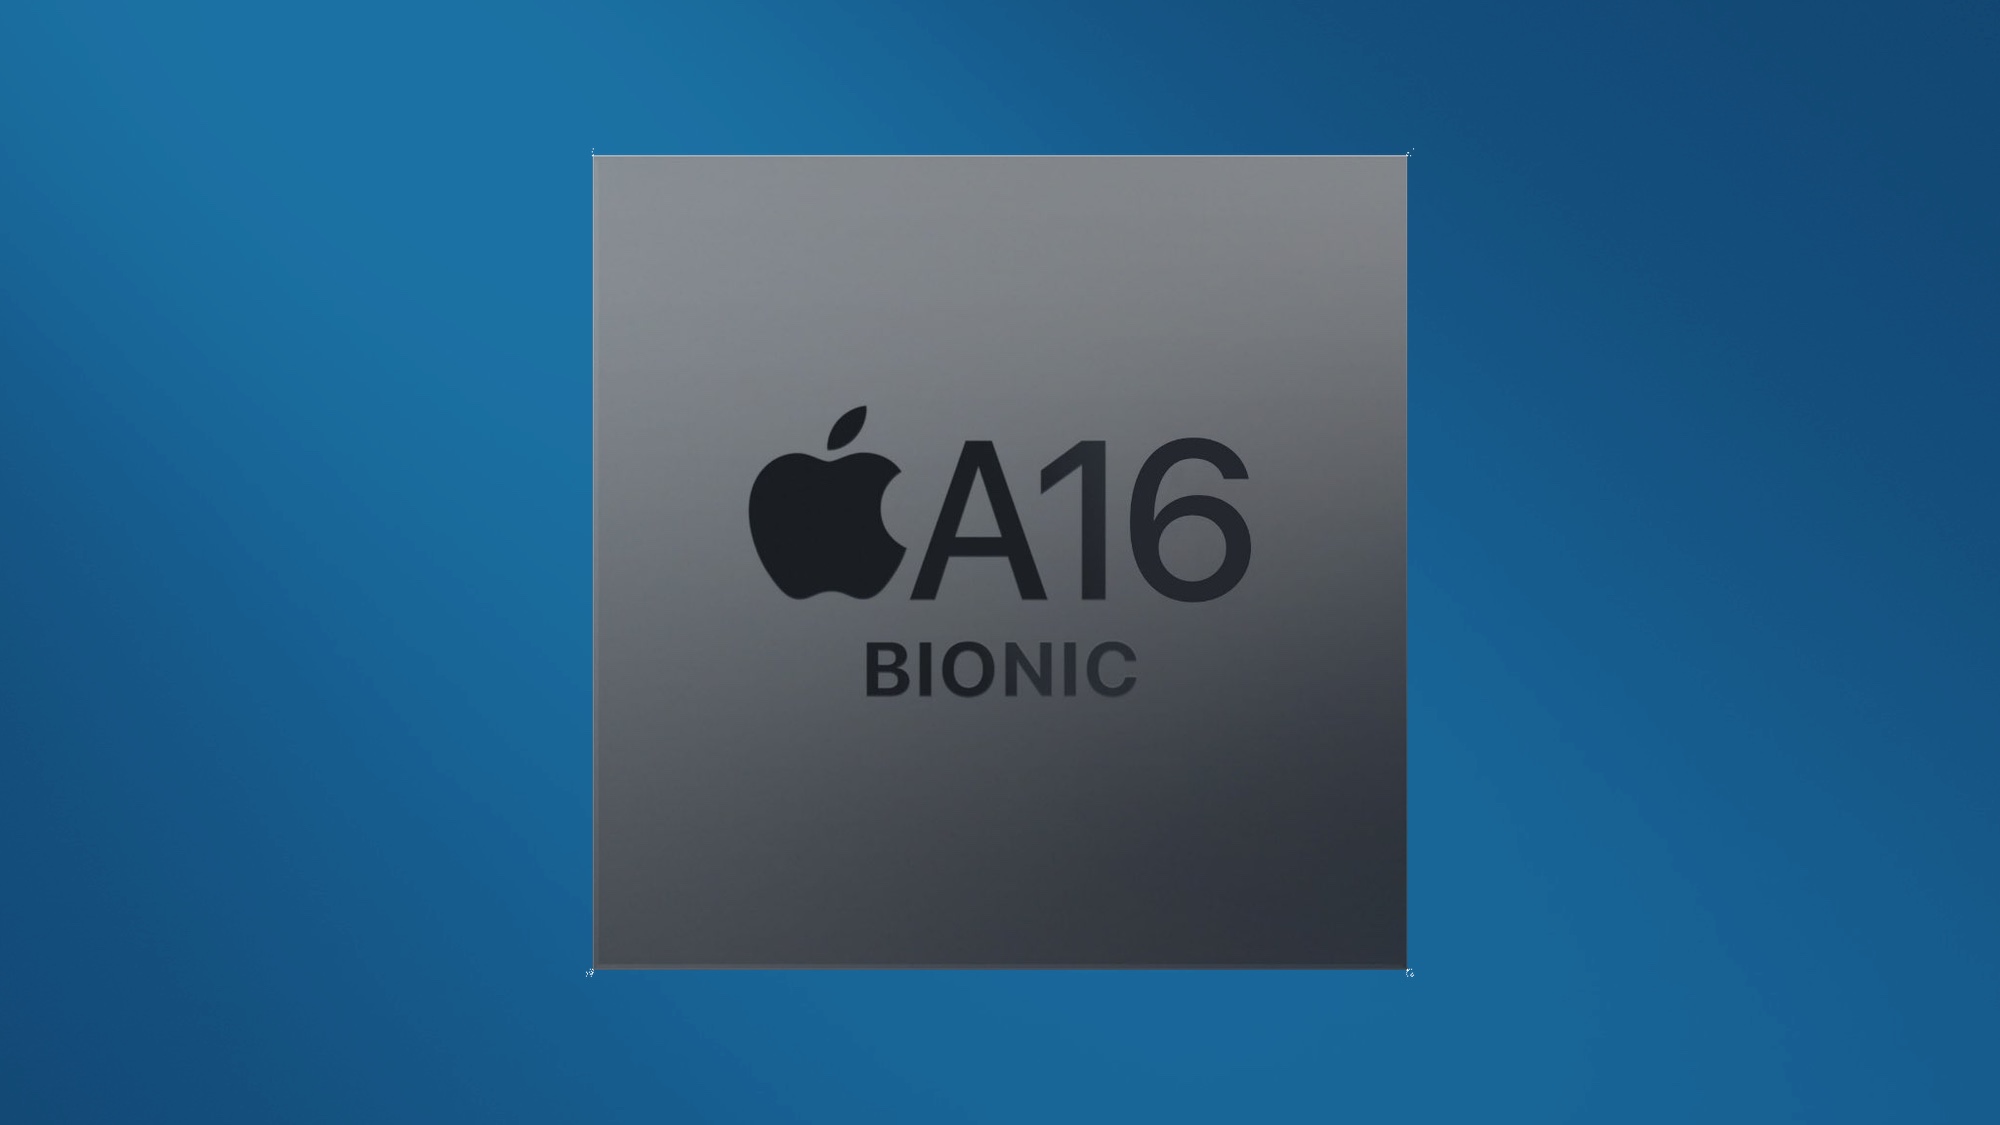 A16 Bionic chipset rendering